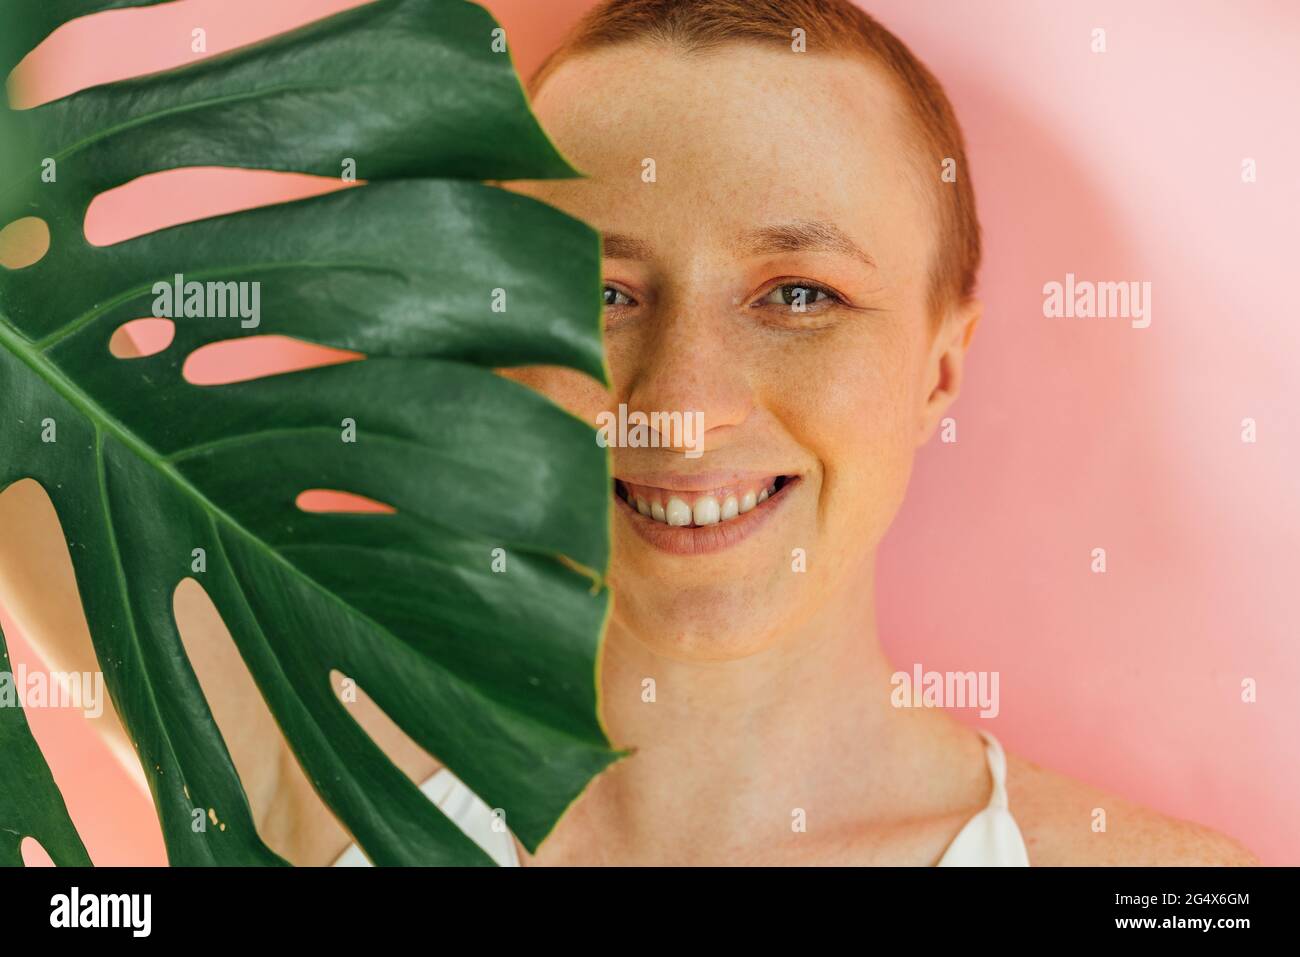 Smiling woman's half face covered with green leaf Stock Photo